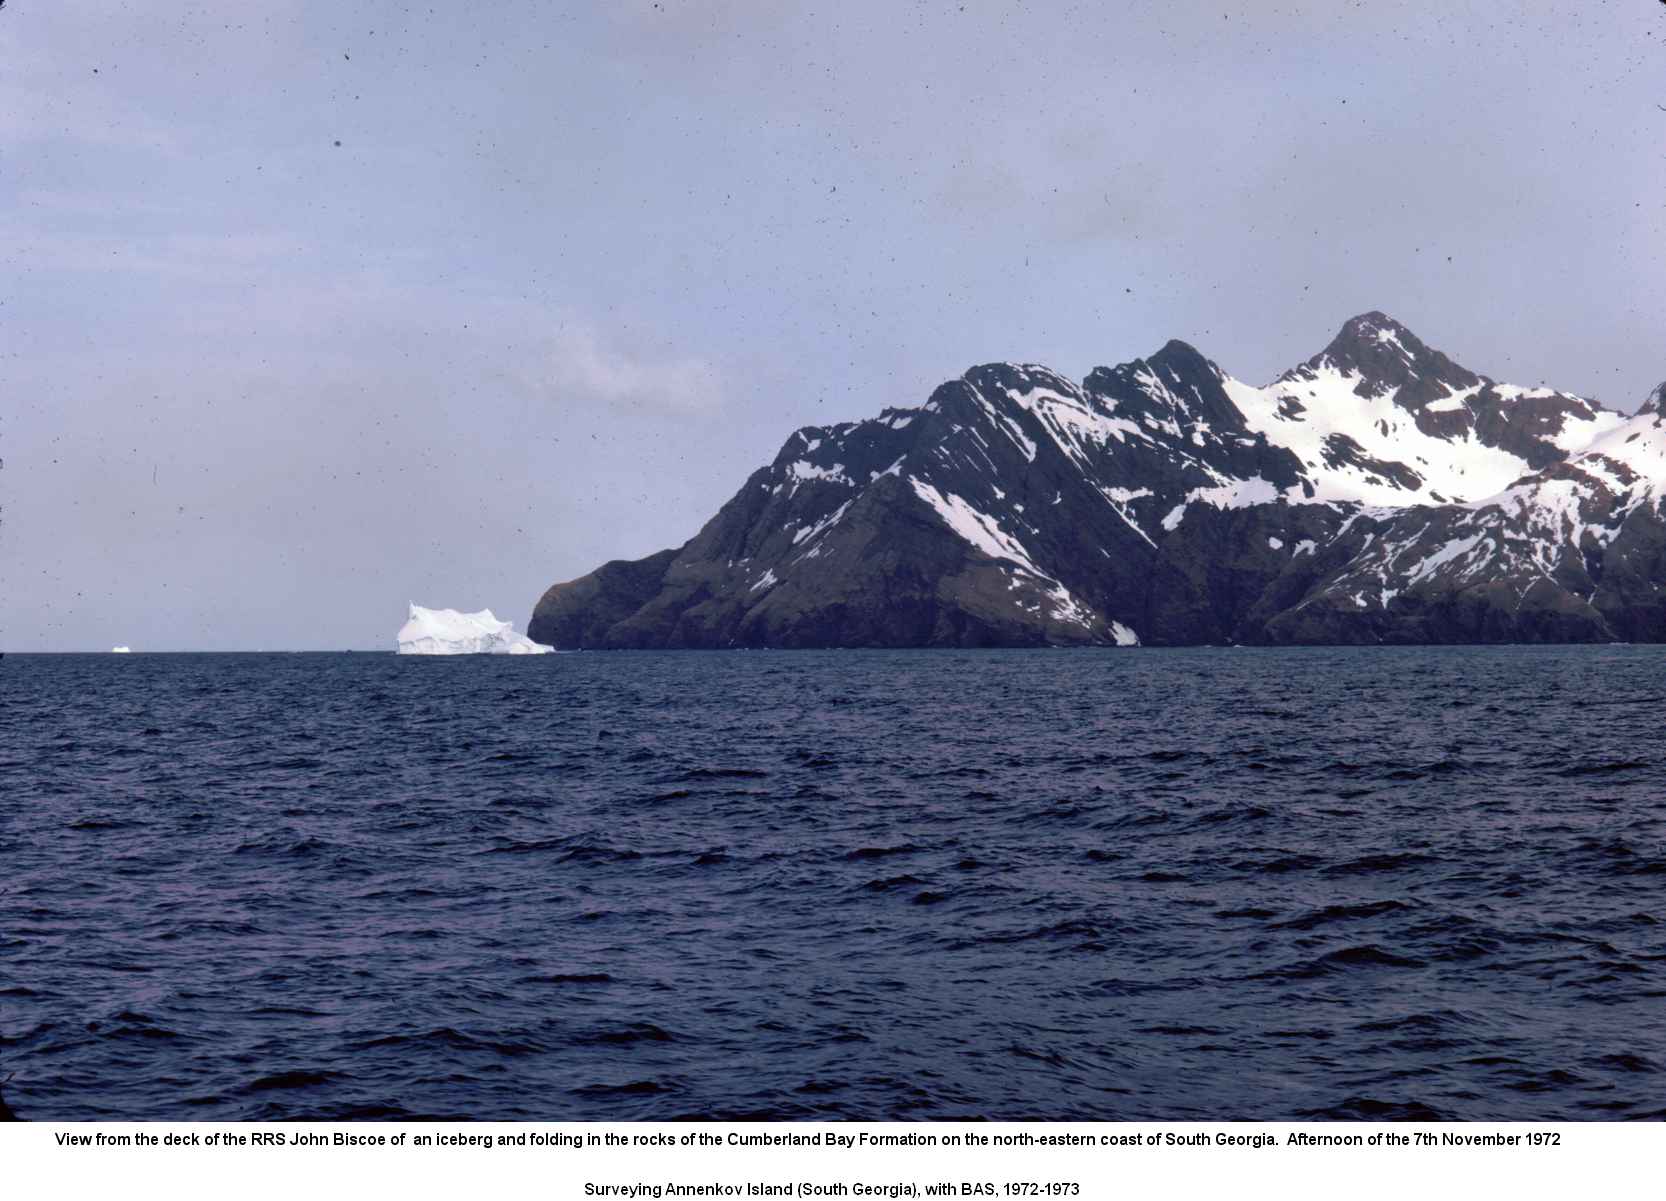 View from the deck of the RRS John Biscoe of  an iceberg and folding in the rocks of the Cumberland Bay Formation on the north-eastern coast of South Georgia.  Afternoon of the 7th November 1972.